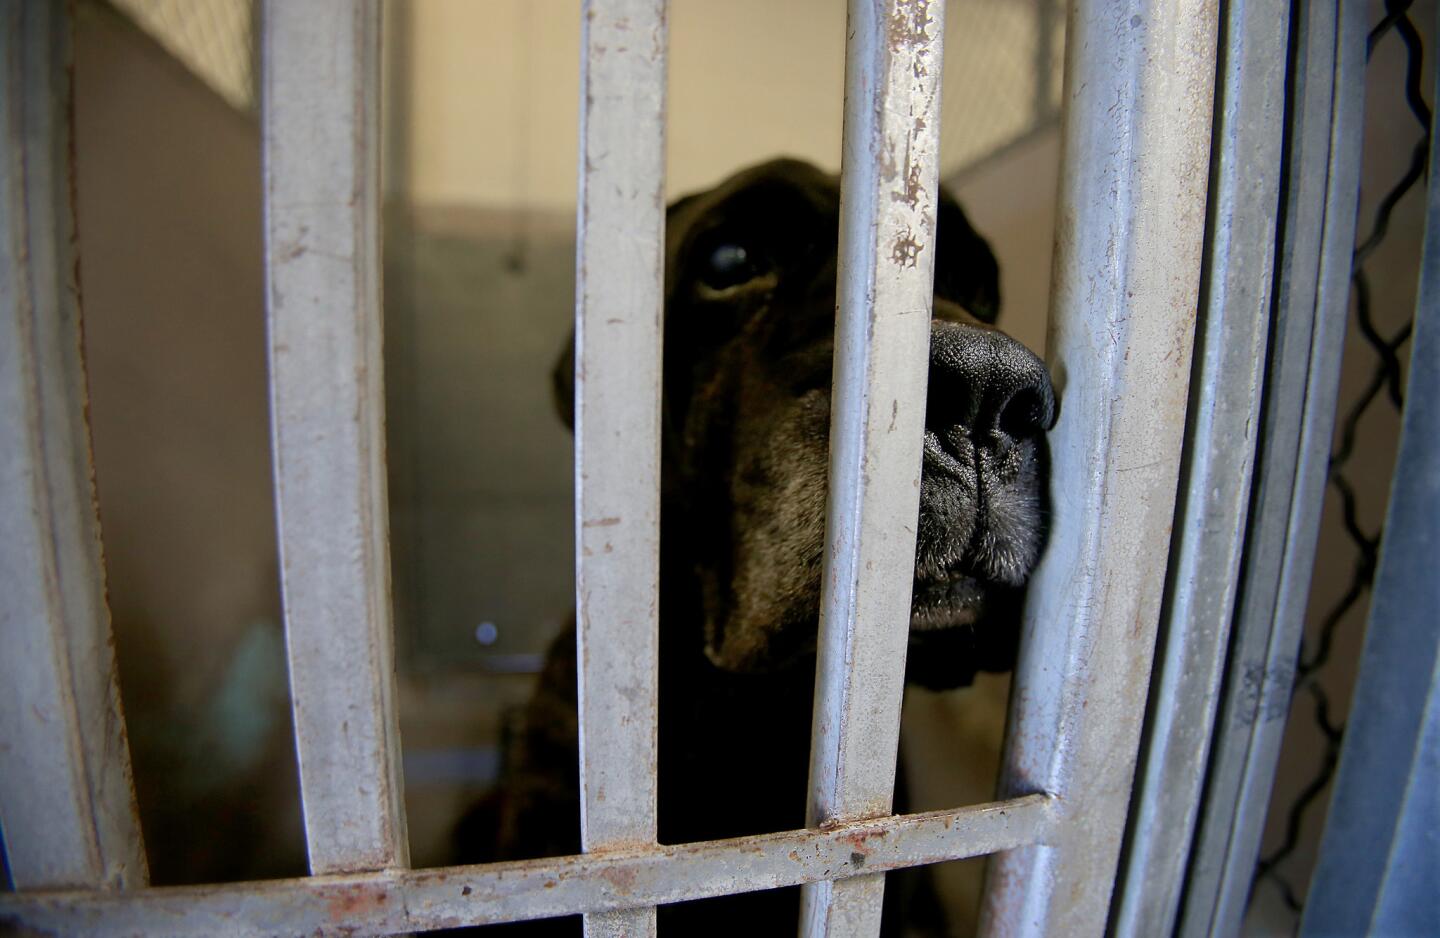 Dogs are kept in small, caged pens that have separate sleeping and exercise areas at the L.A. County animal shelter in Baldwin Park, one of the oldest and most overcrowded facilities, with the highest euthanasia rate.